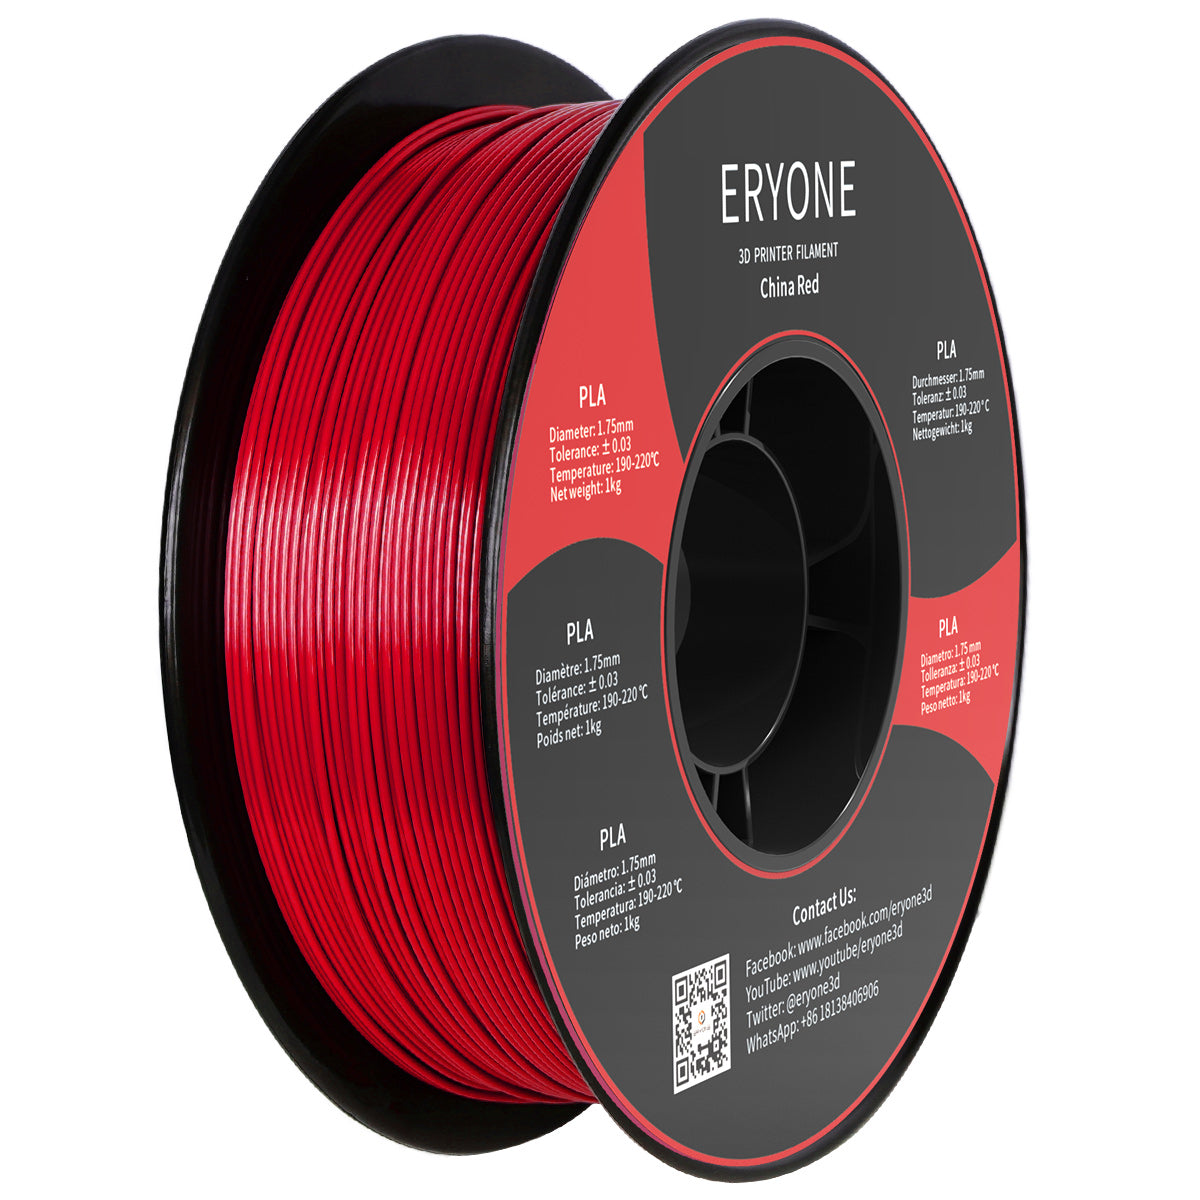 eSUN PETG Solid Red 1.75mm 1kg/2.2lbs